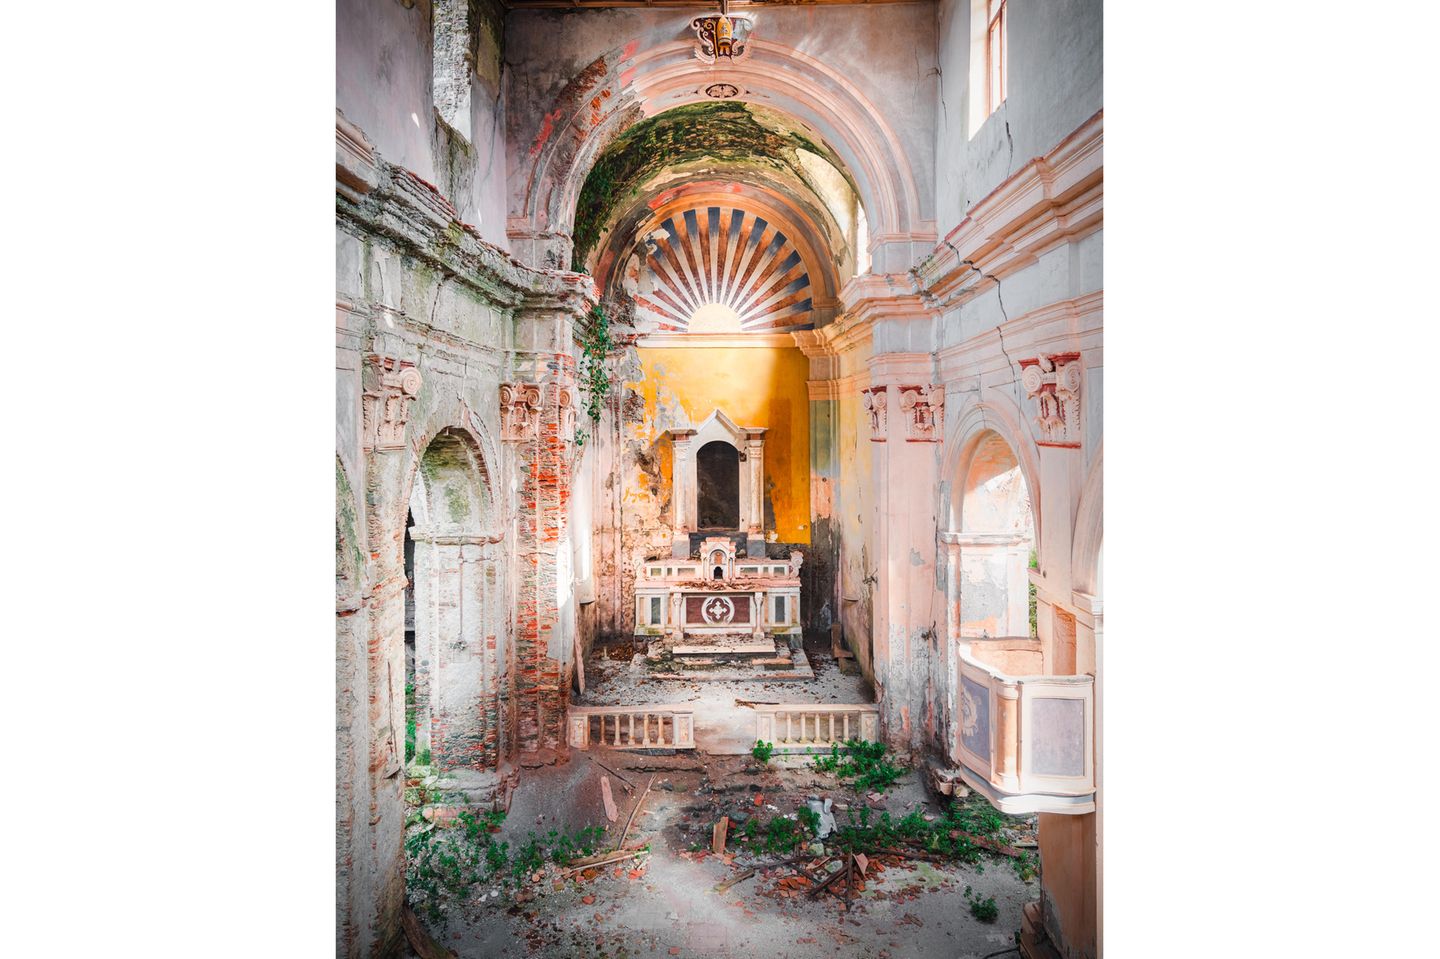 Photo 2: Chiesa Madre di San Nicola, in the Lamezia area, is another prime example of a stunning church, sitting abandoned in spite of the many efforts from the community in trying to secure funds for renovations and restoration efforts.